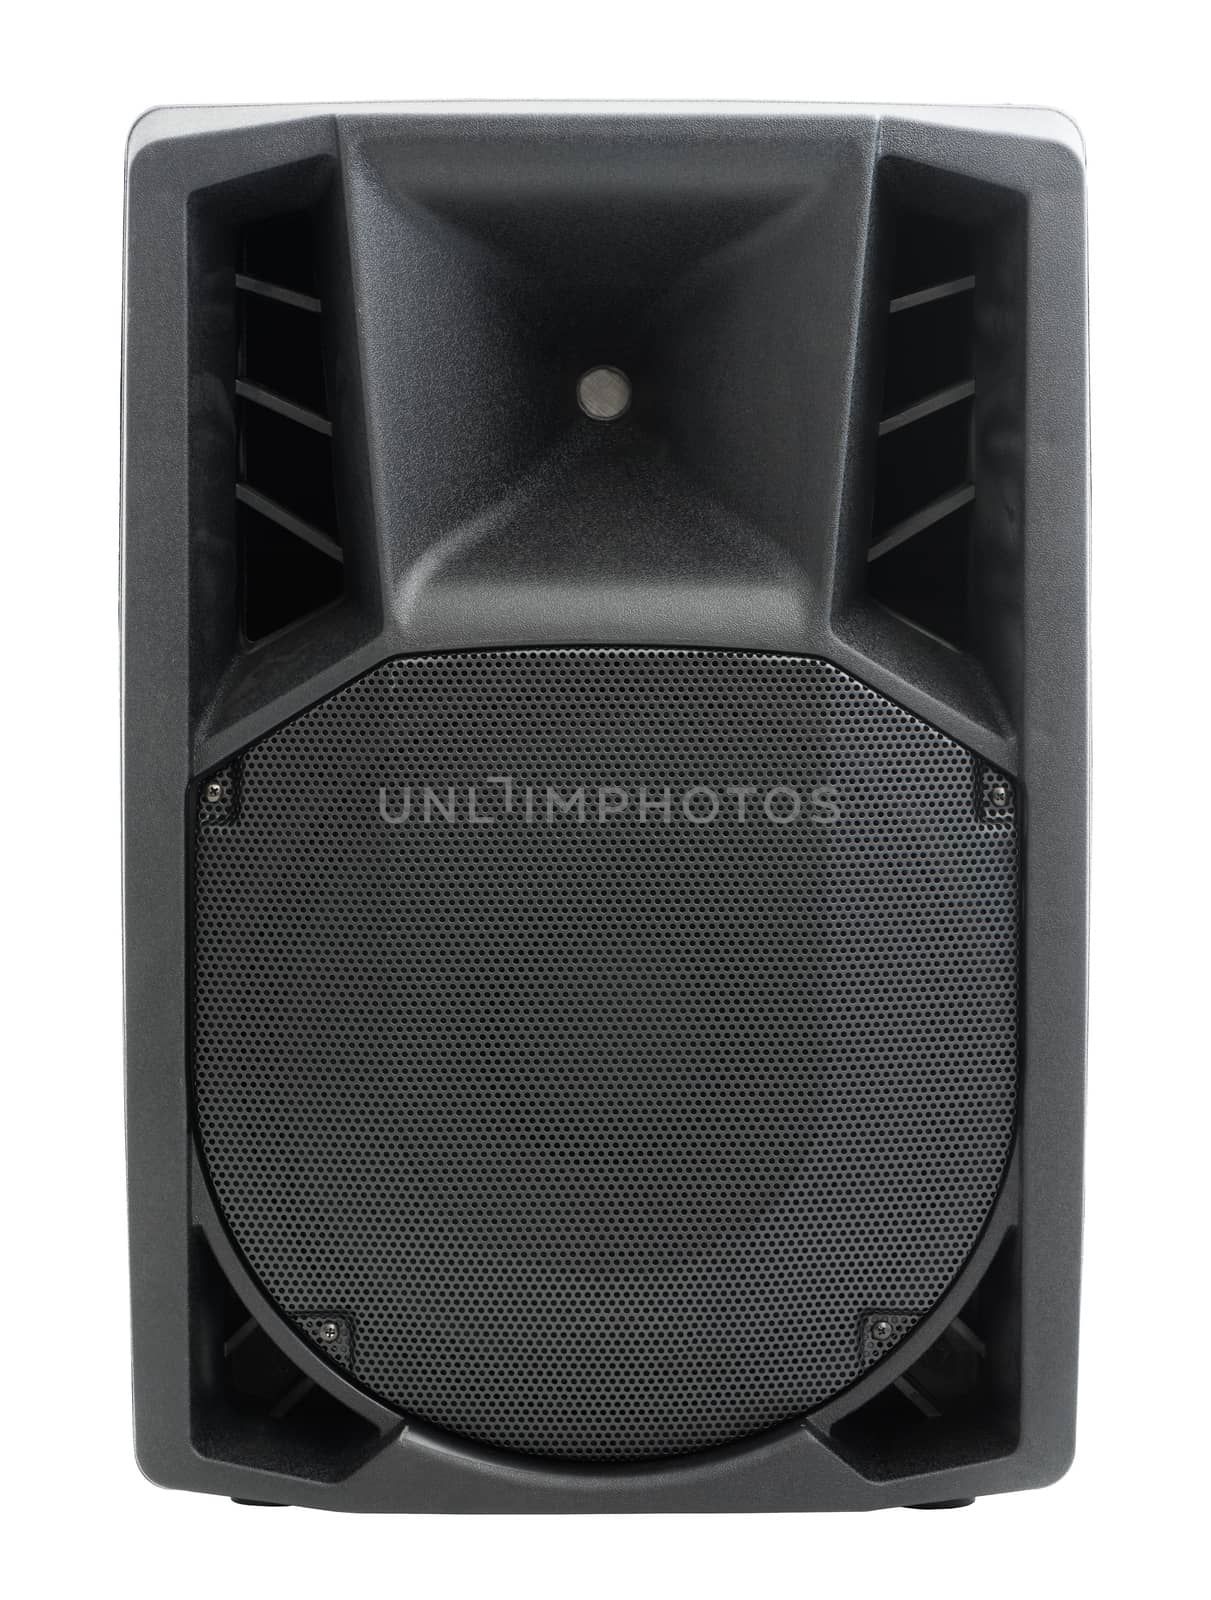 Black Audio Speaker Isolated on White Background, Front View.